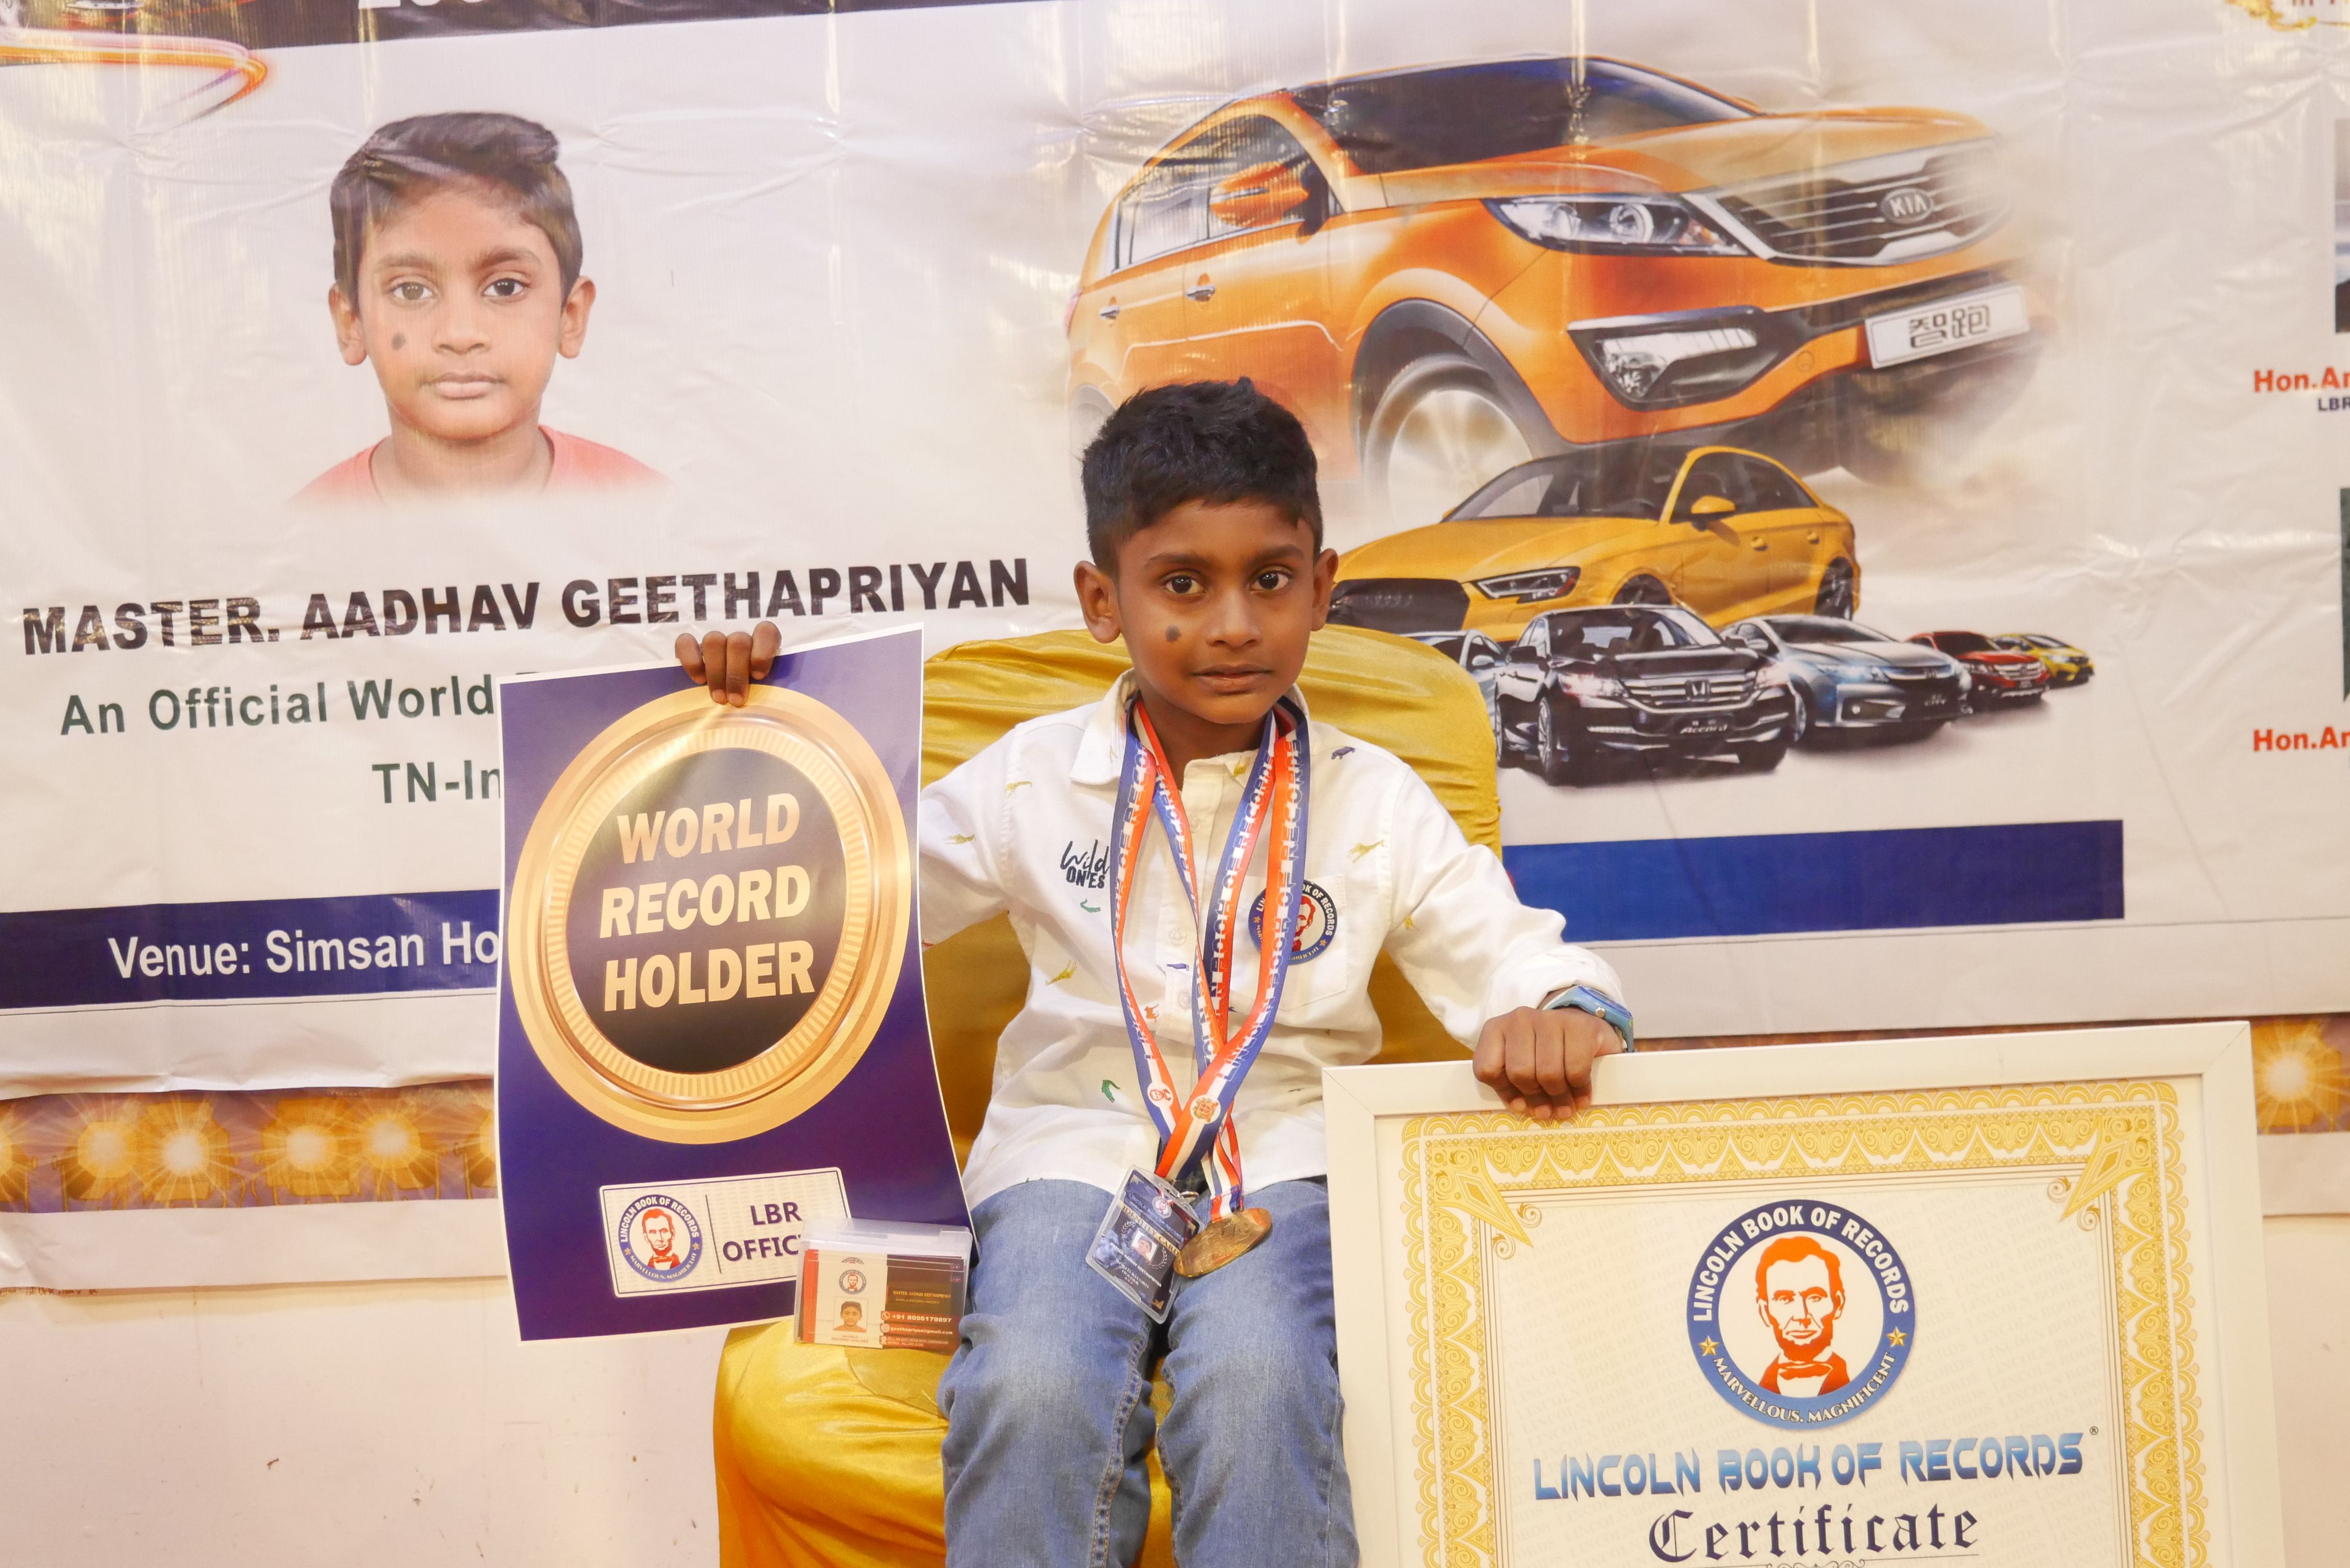 Youngest kid in the world to identify the  200 car names with their logos in a short time